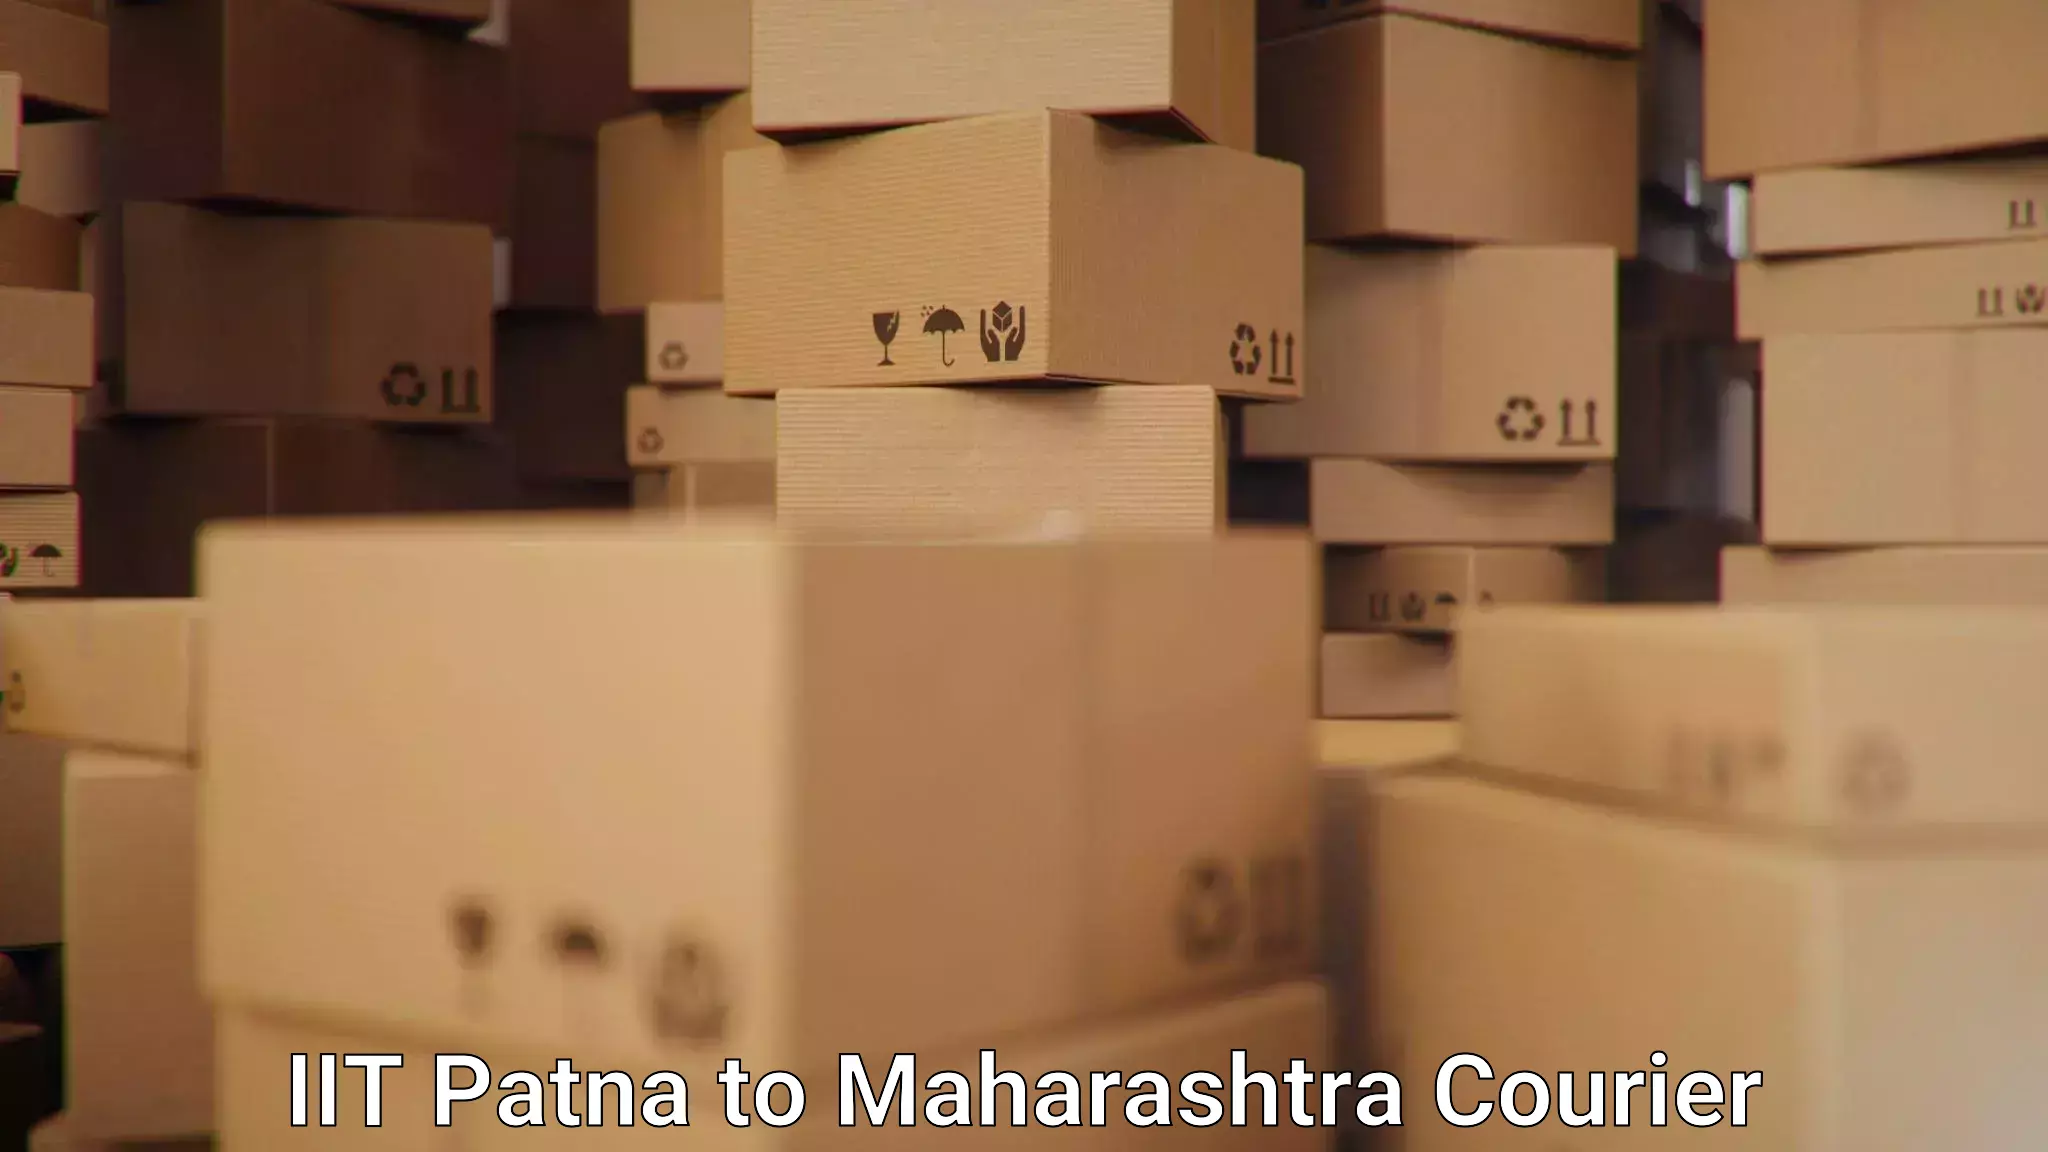 Courier membership in IIT Patna to Loha Nanded